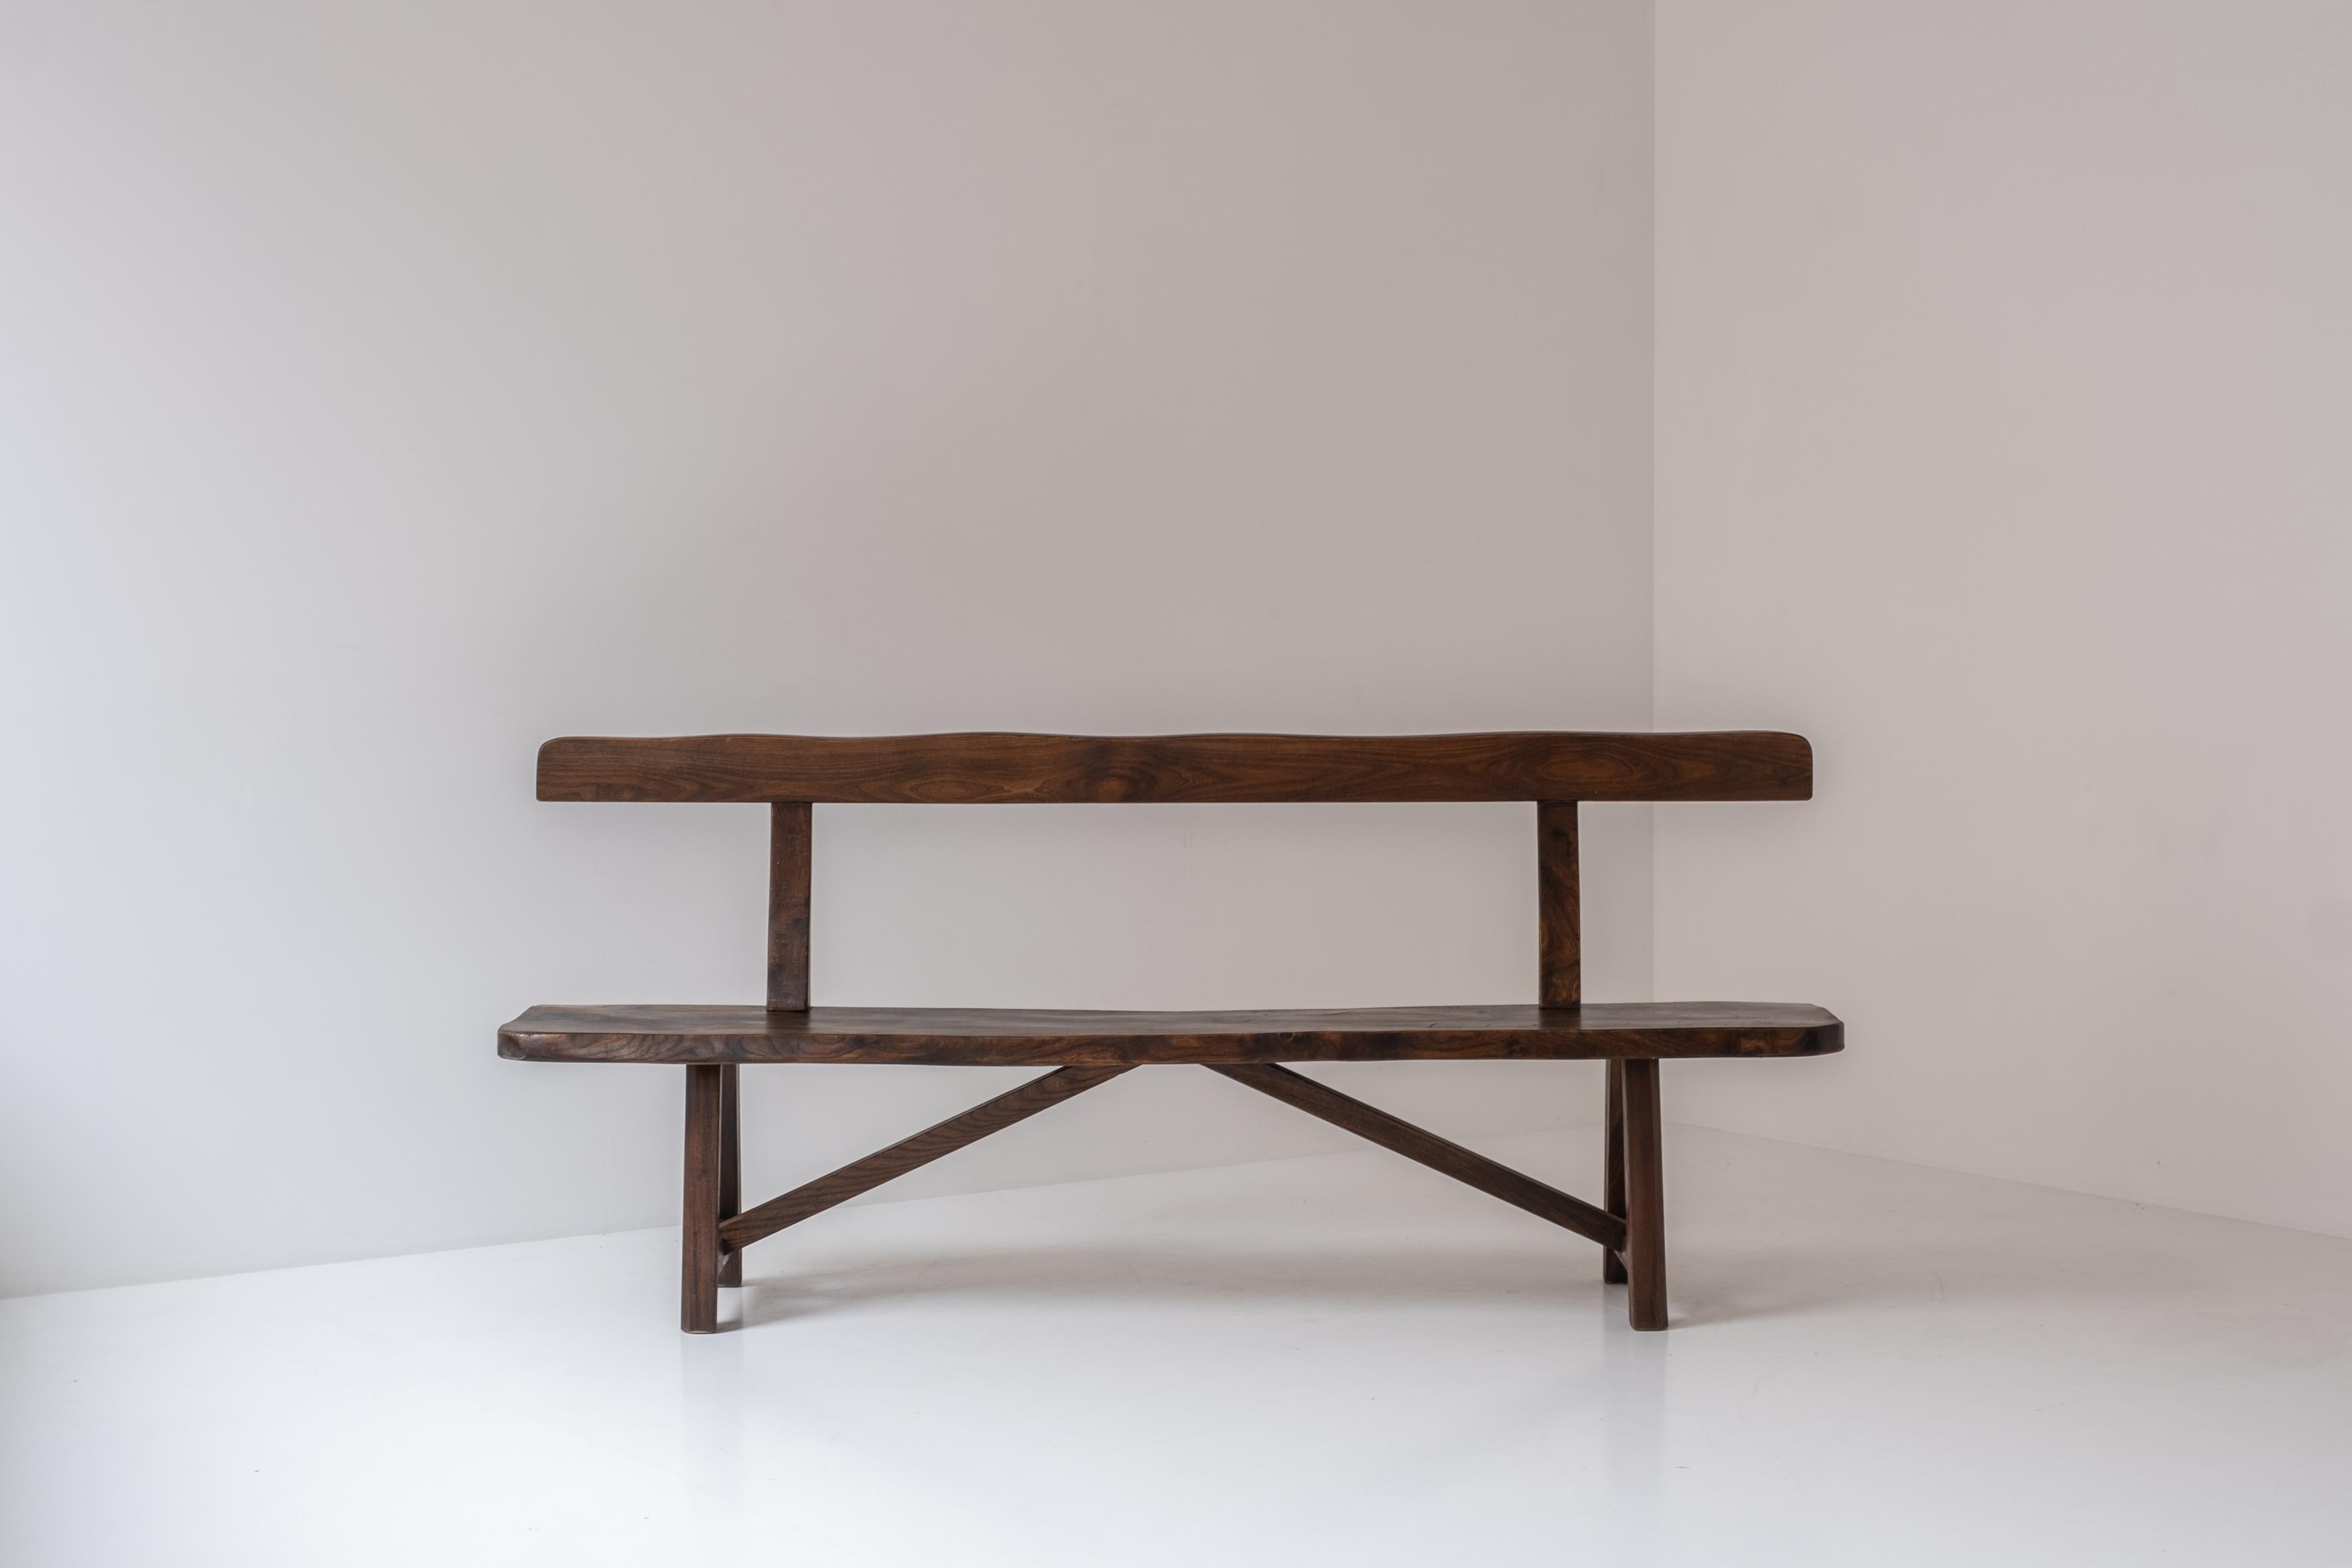 Sculptural bench by Olavi Hanninen for Mikko Nupponen, Finland 1950’s. This bench is made of stained elm wood and sculpturally crafted by hand. Presented in a good, restored, condition.

We can pack and ship worldwide !